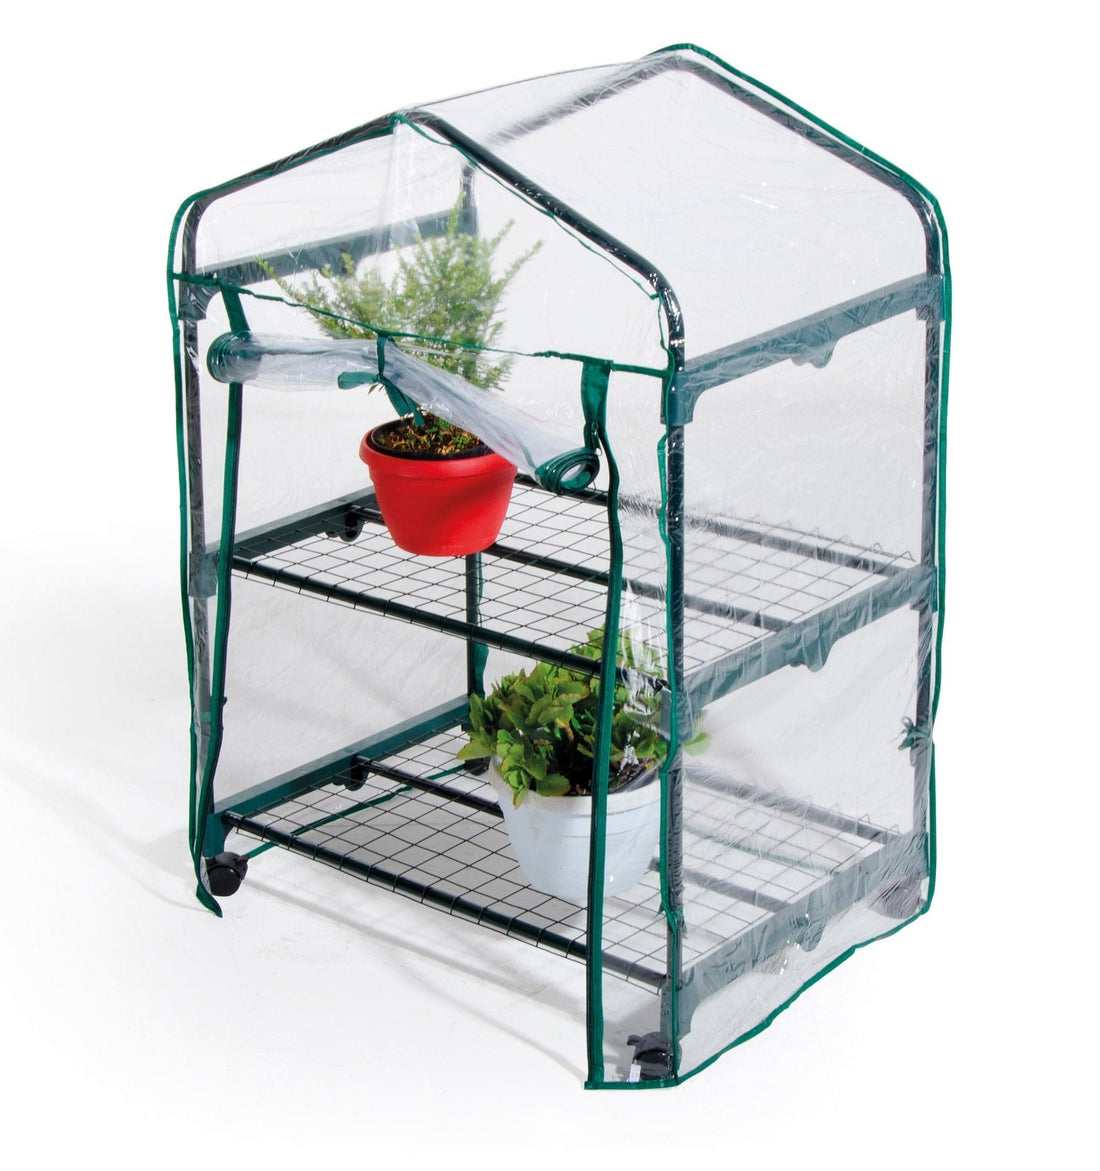 RECTANGULAR GREENHOUSE 2 SHELVES WITH WHEELS 69X49XH98 CM, CANVAS INCLUDED